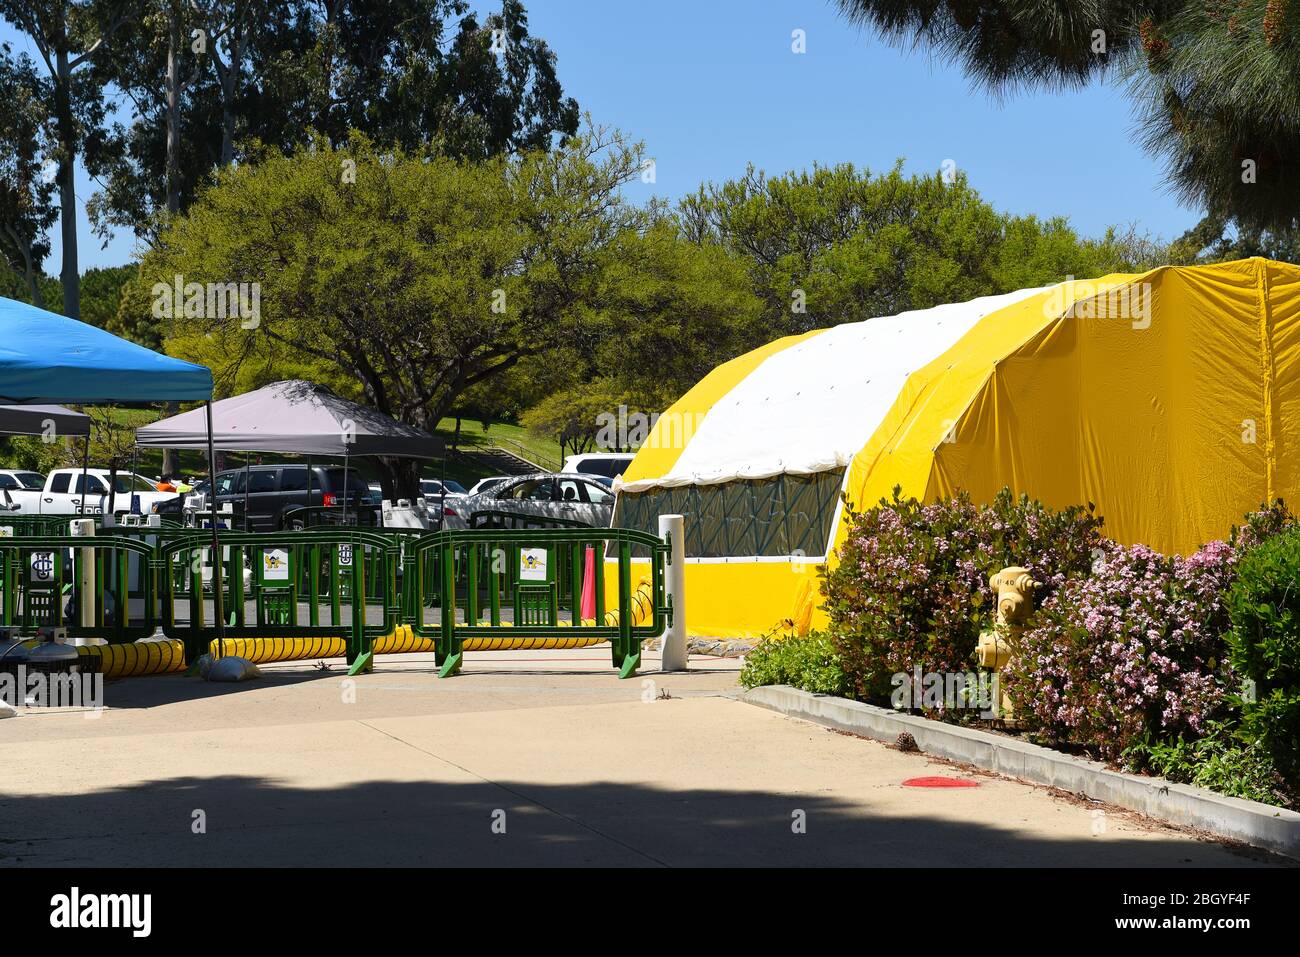 IRVINE, CALIFORNIA - 22 APRIL 2020: Tent for Drive-thru medical testing during the COVID19 pandemic, at the Gottschalk Medical Plaza on the Campus of Stock Photo